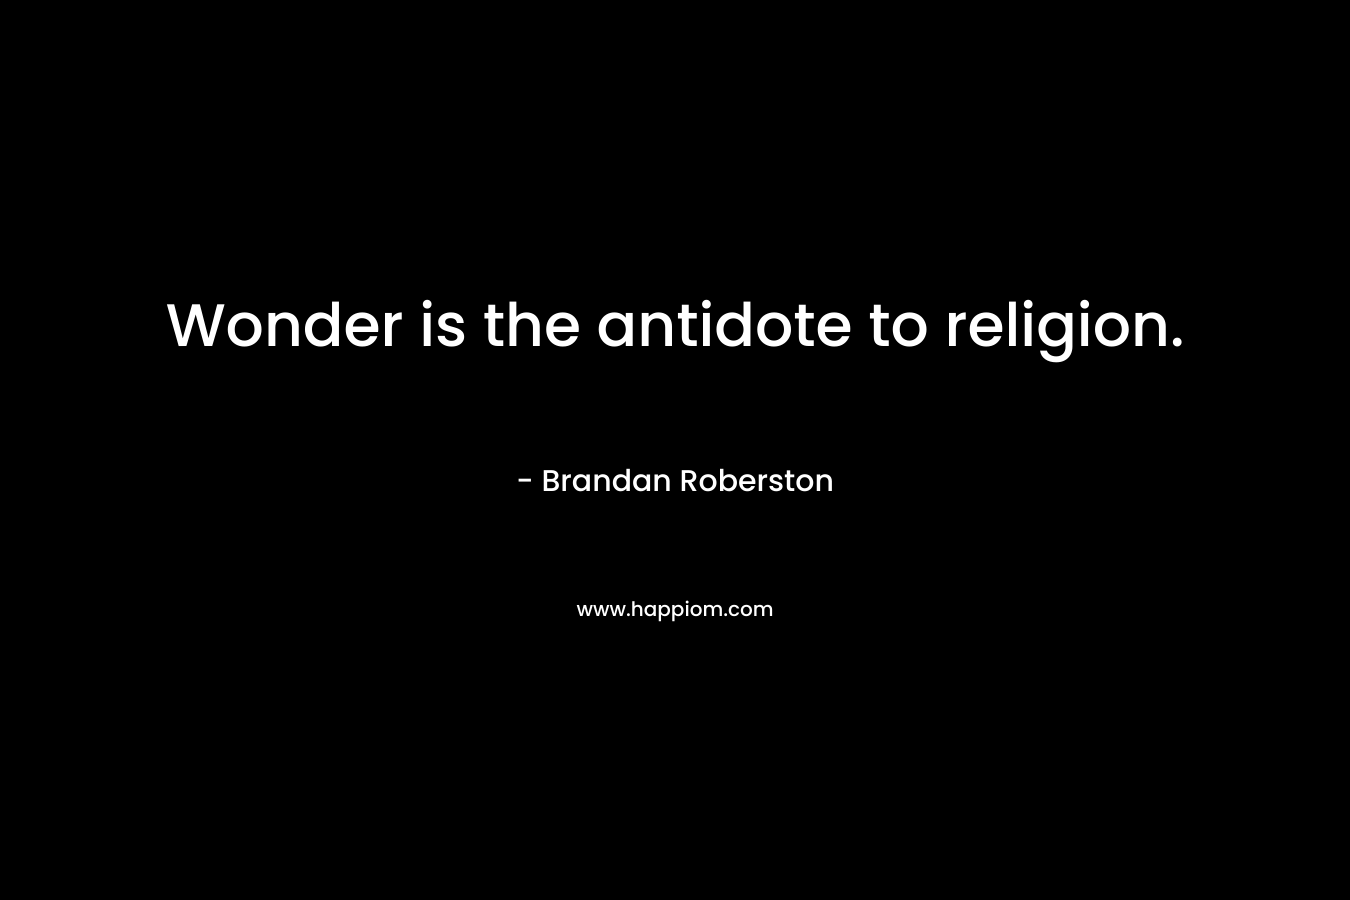 Wonder is the antidote to religion.